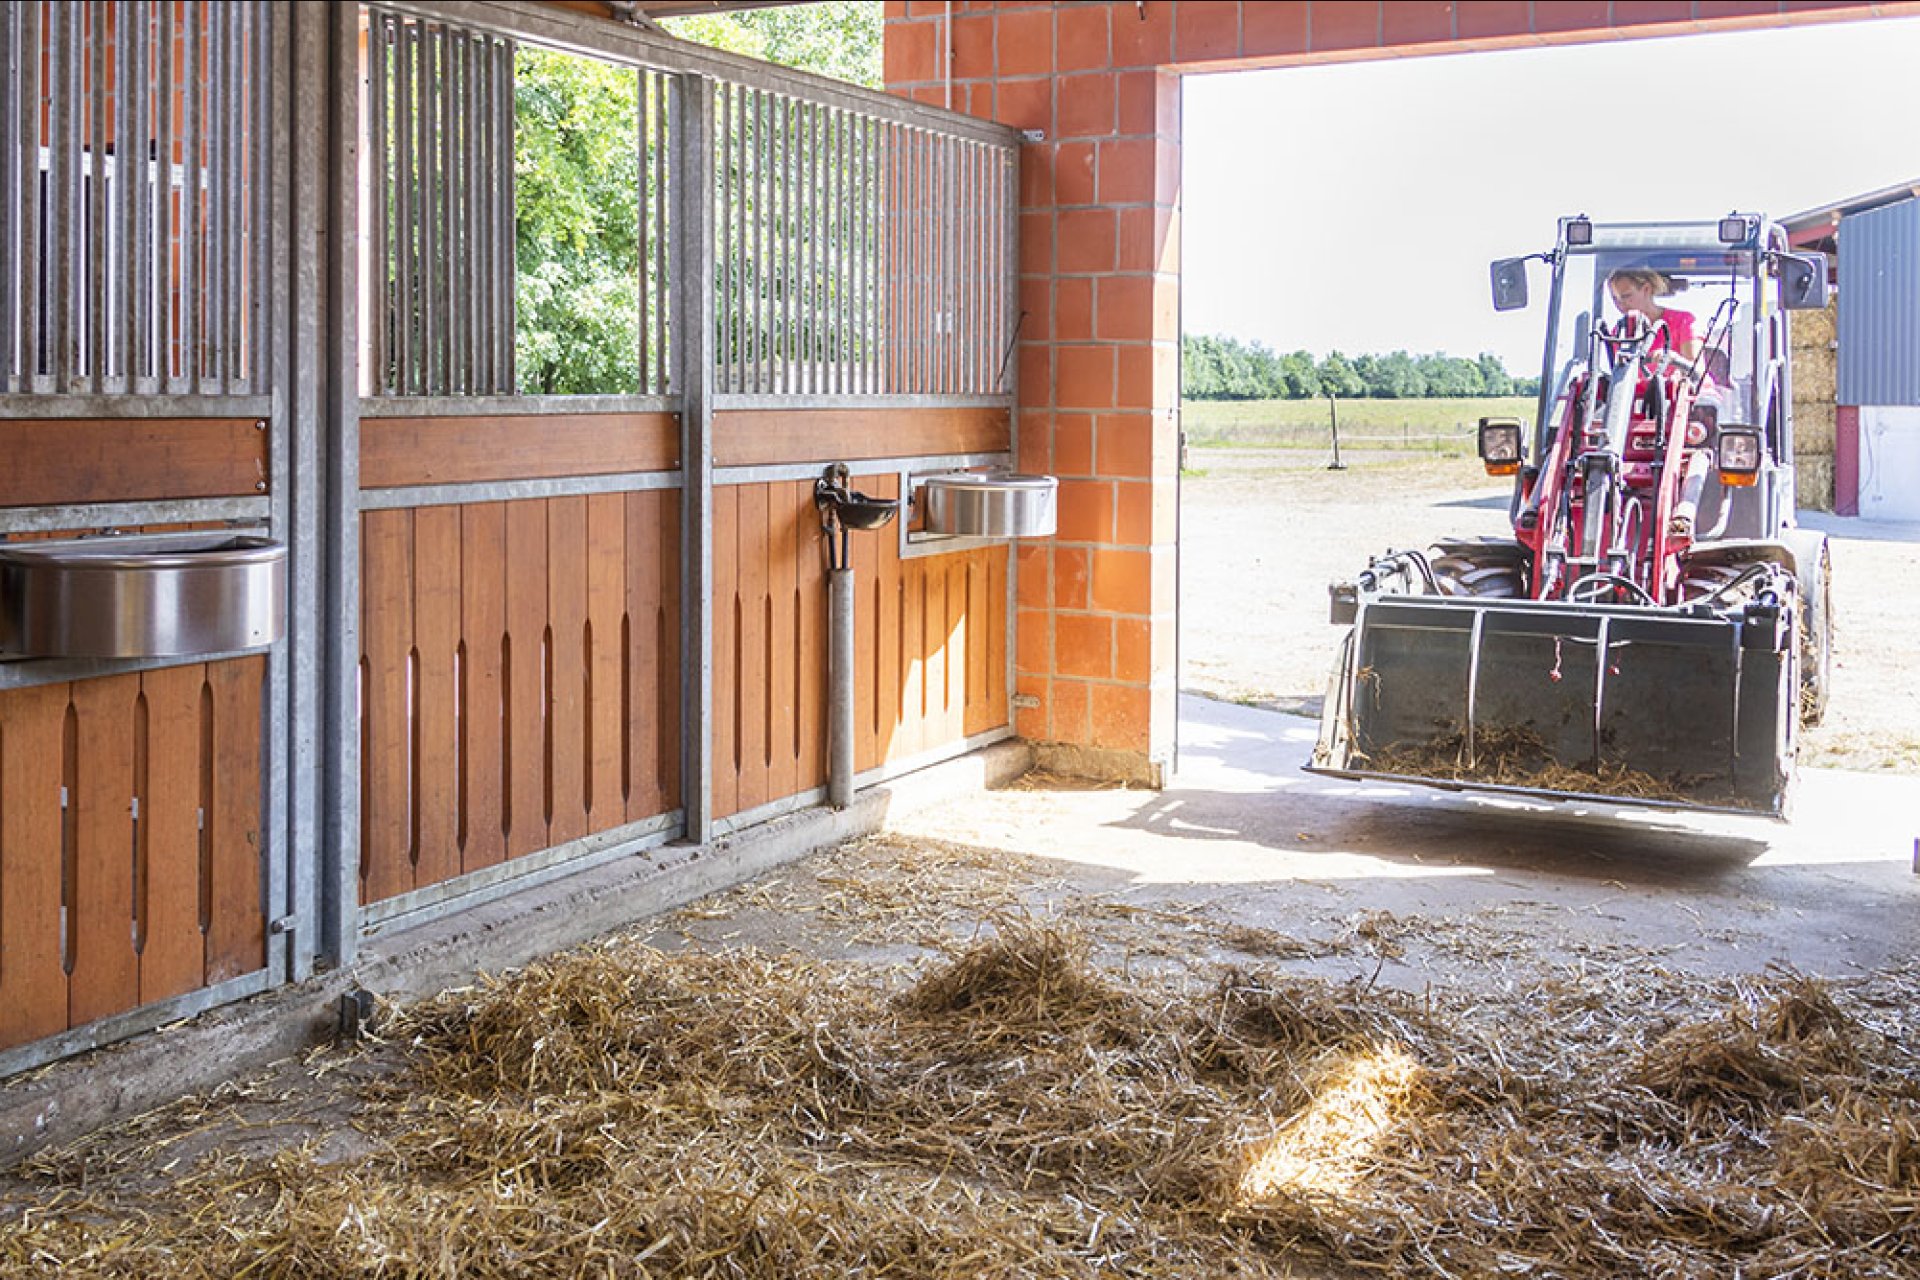 Image horse stall stable partitions (M000115724)